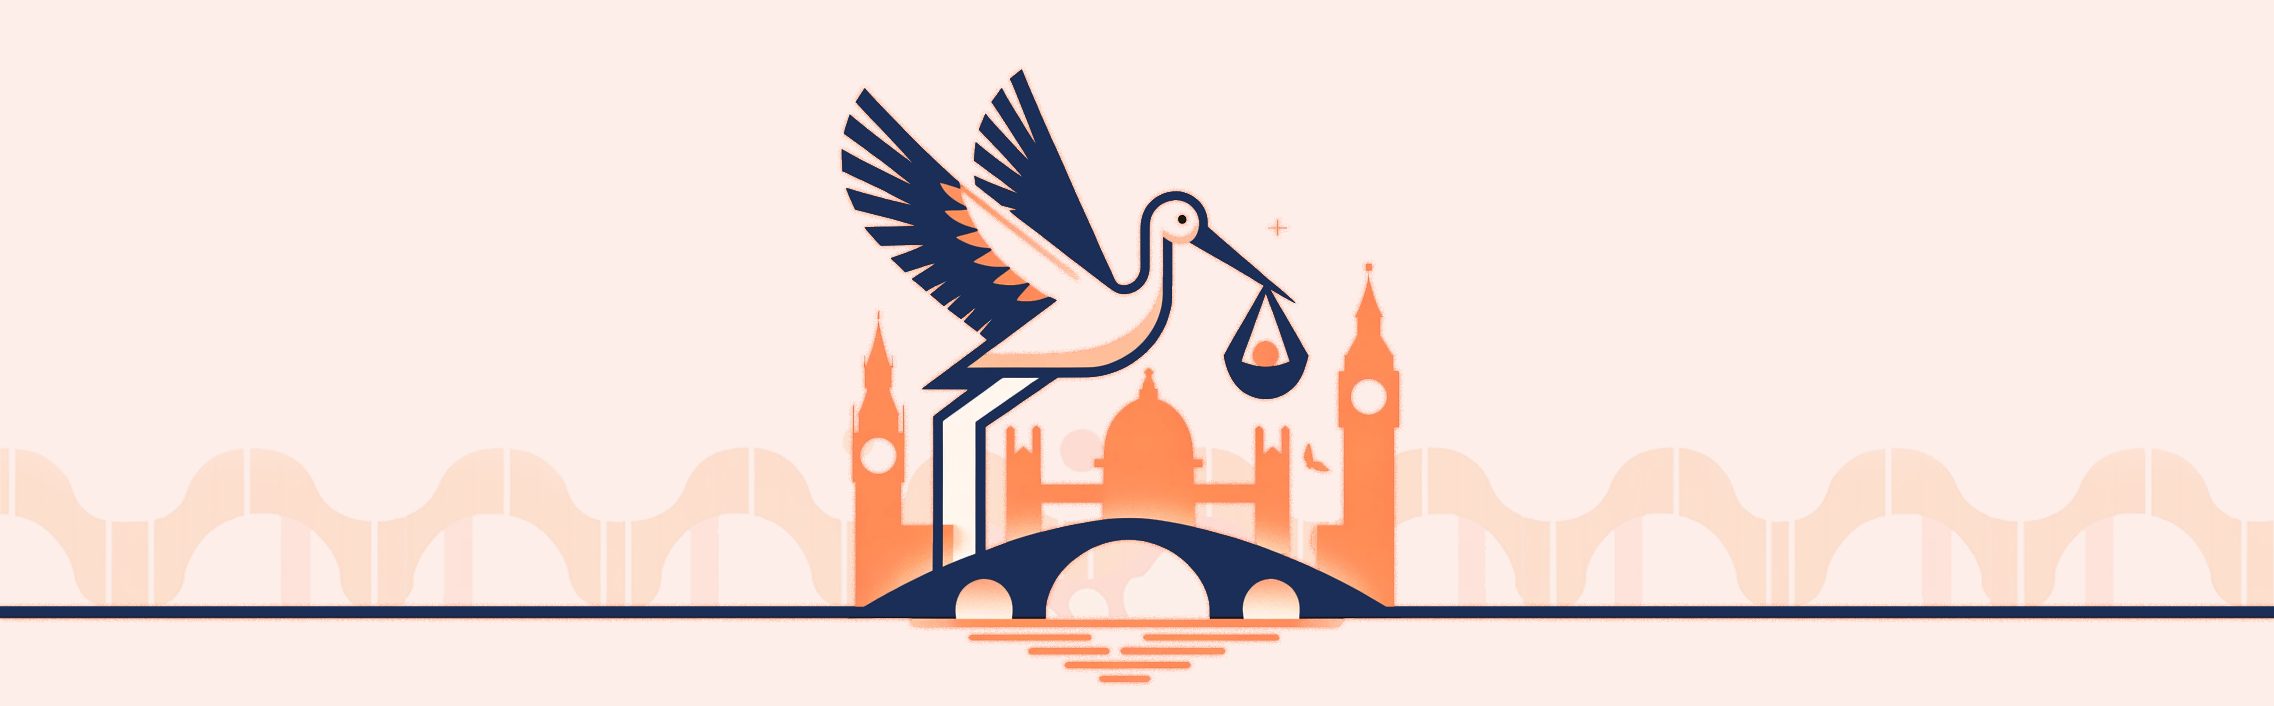 Graphic of a stork carrying a baby over the city of London hospital. Blog about baby structures.